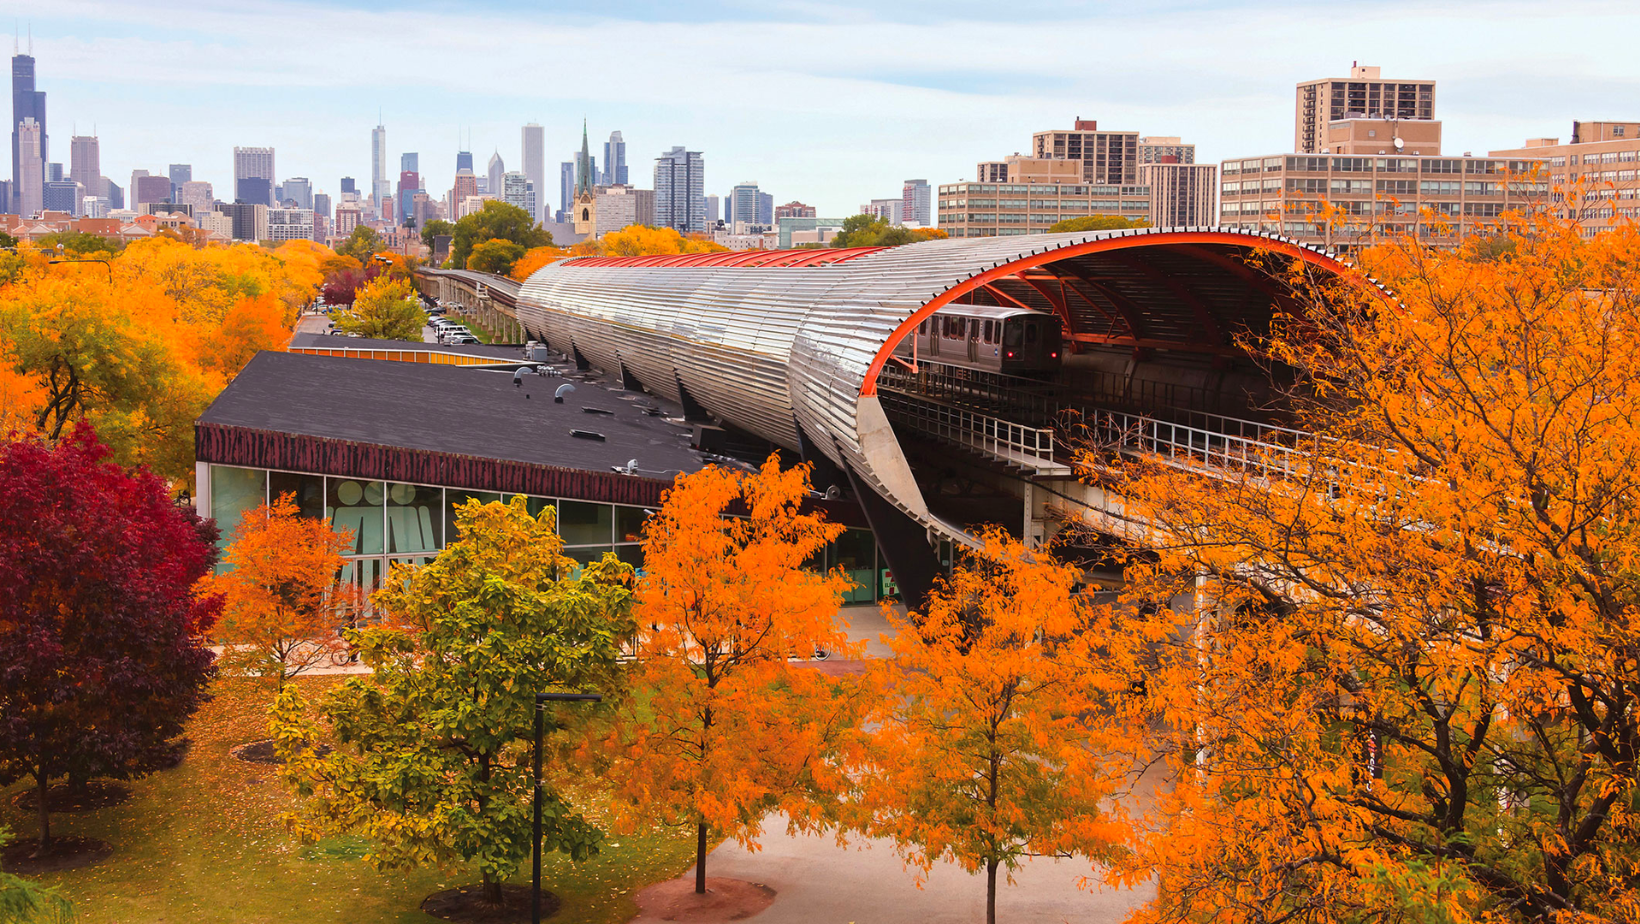 The Illinois Institute of Technology: A Career Focused School in Chicago